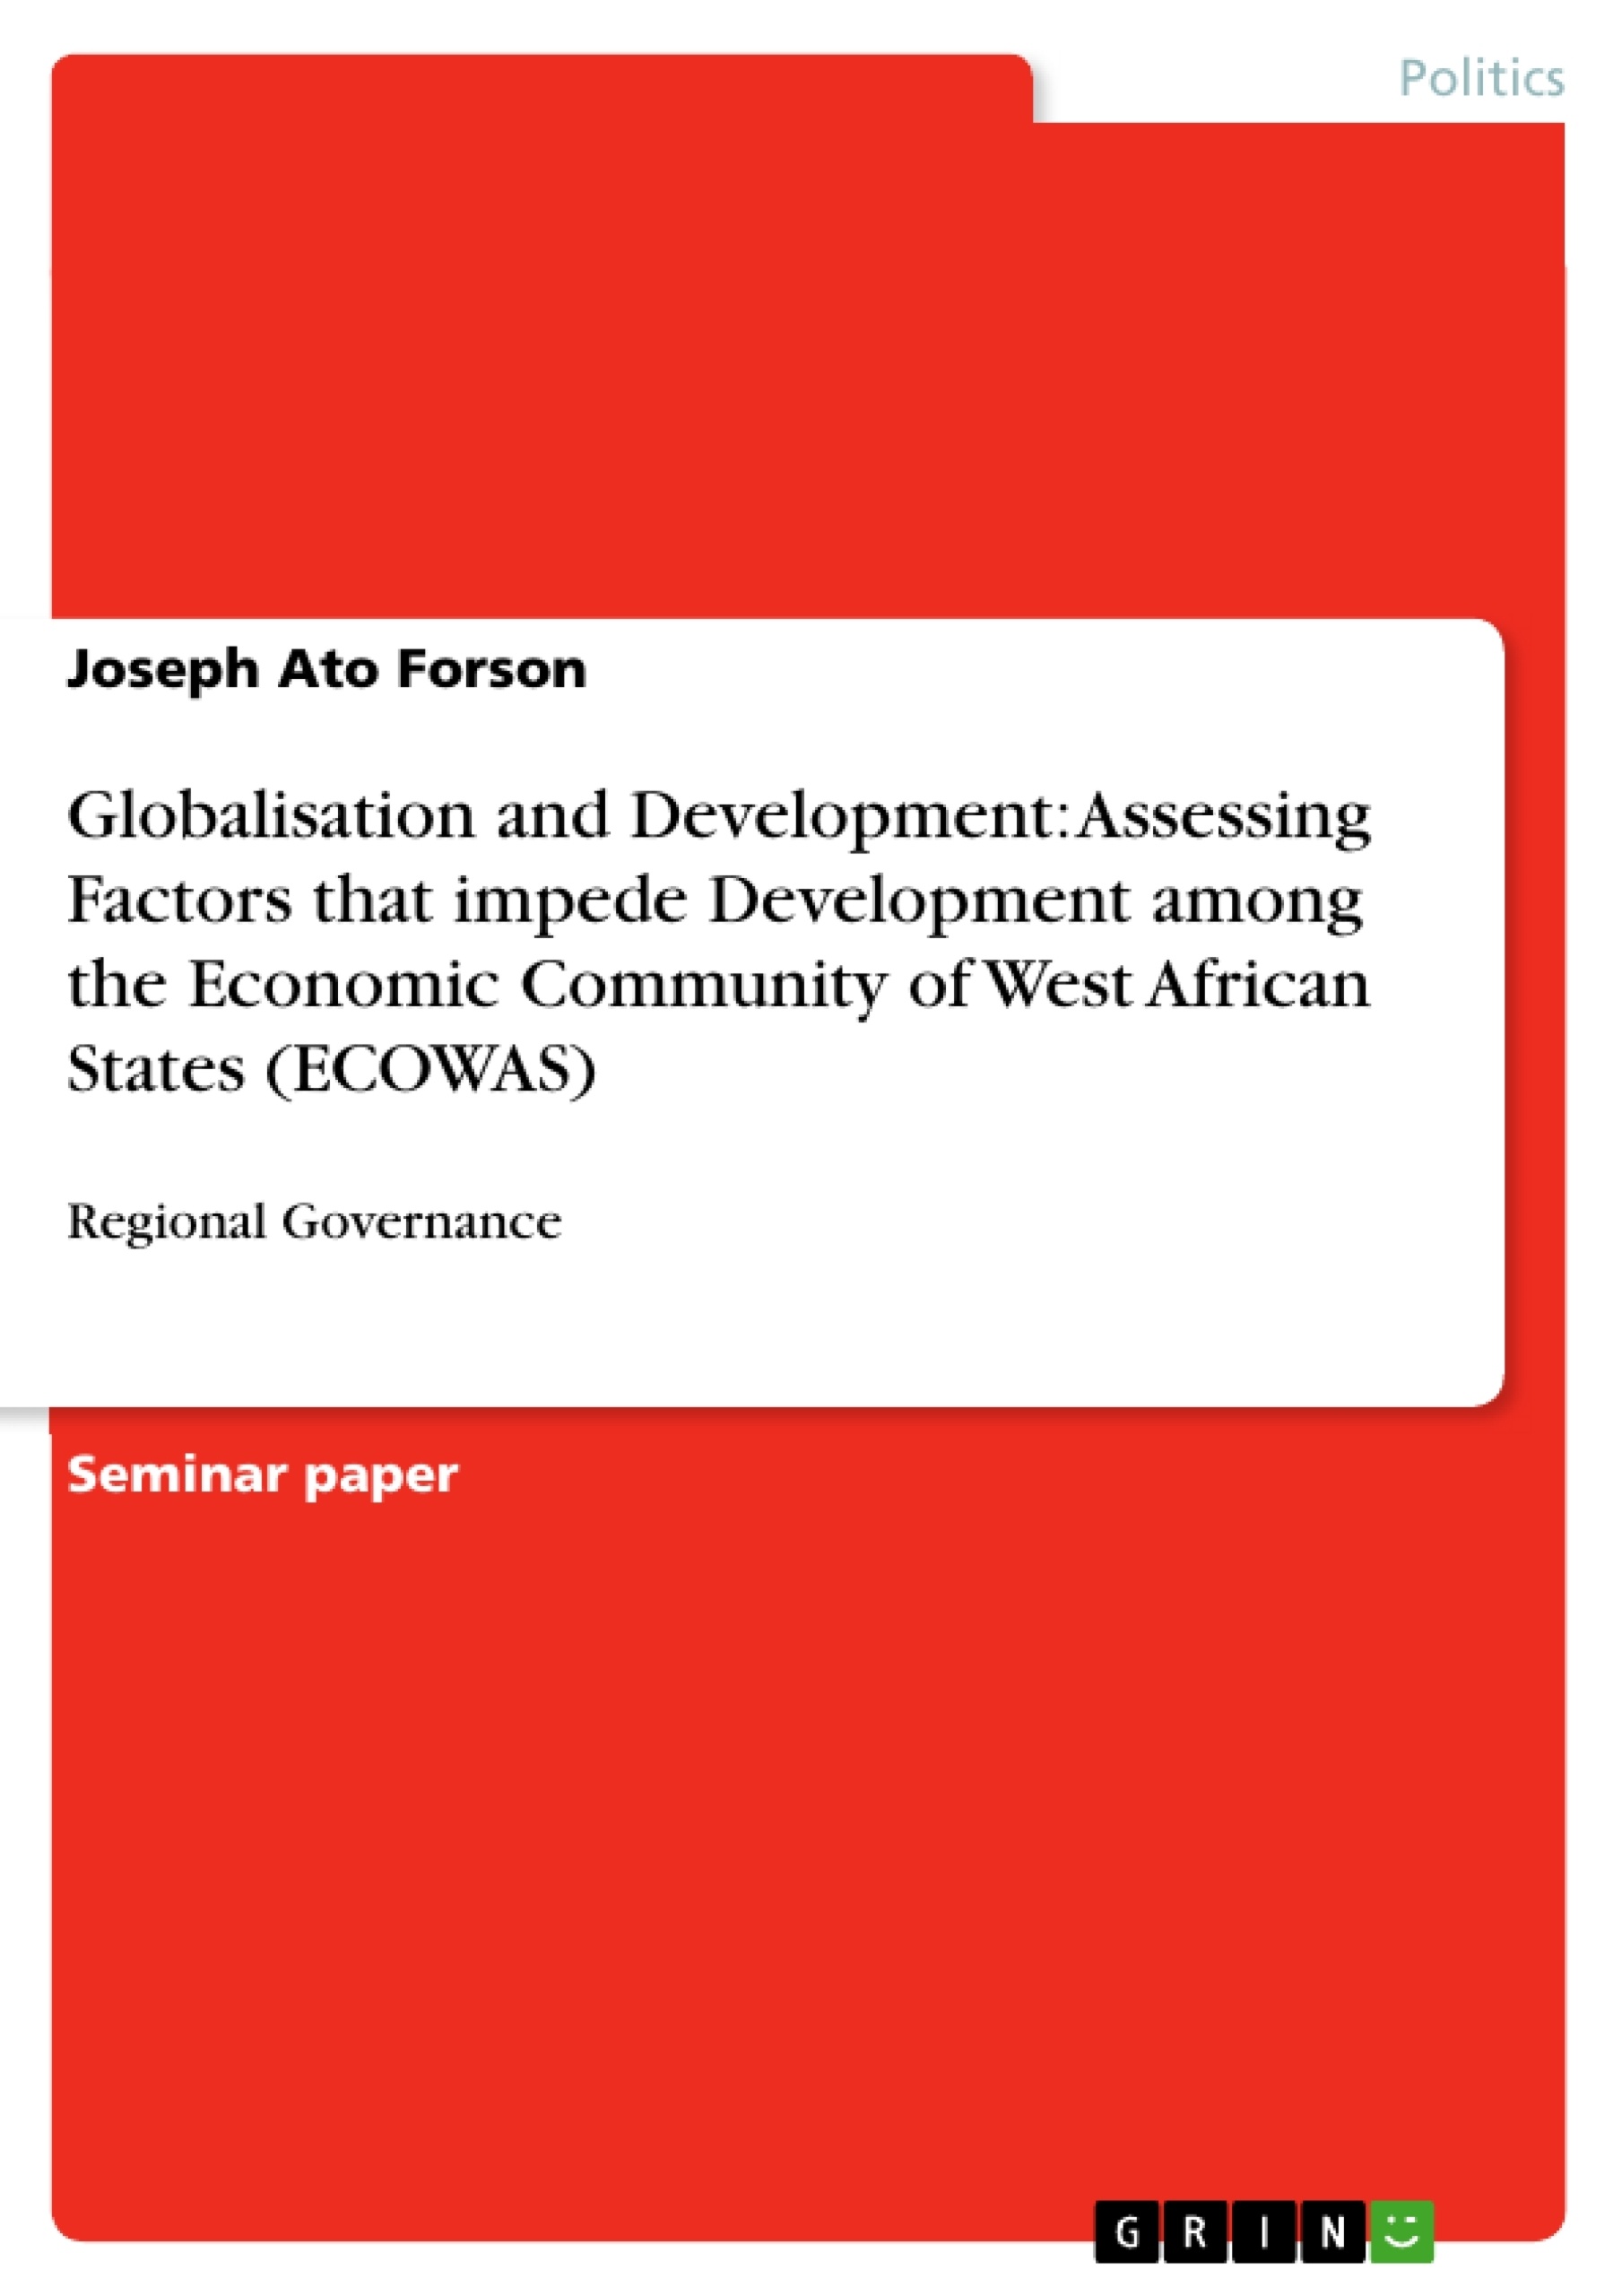 Título: Globalisation and Development: Assessing Factors that impede Development among the Economic Community of West African States (ECOWAS)